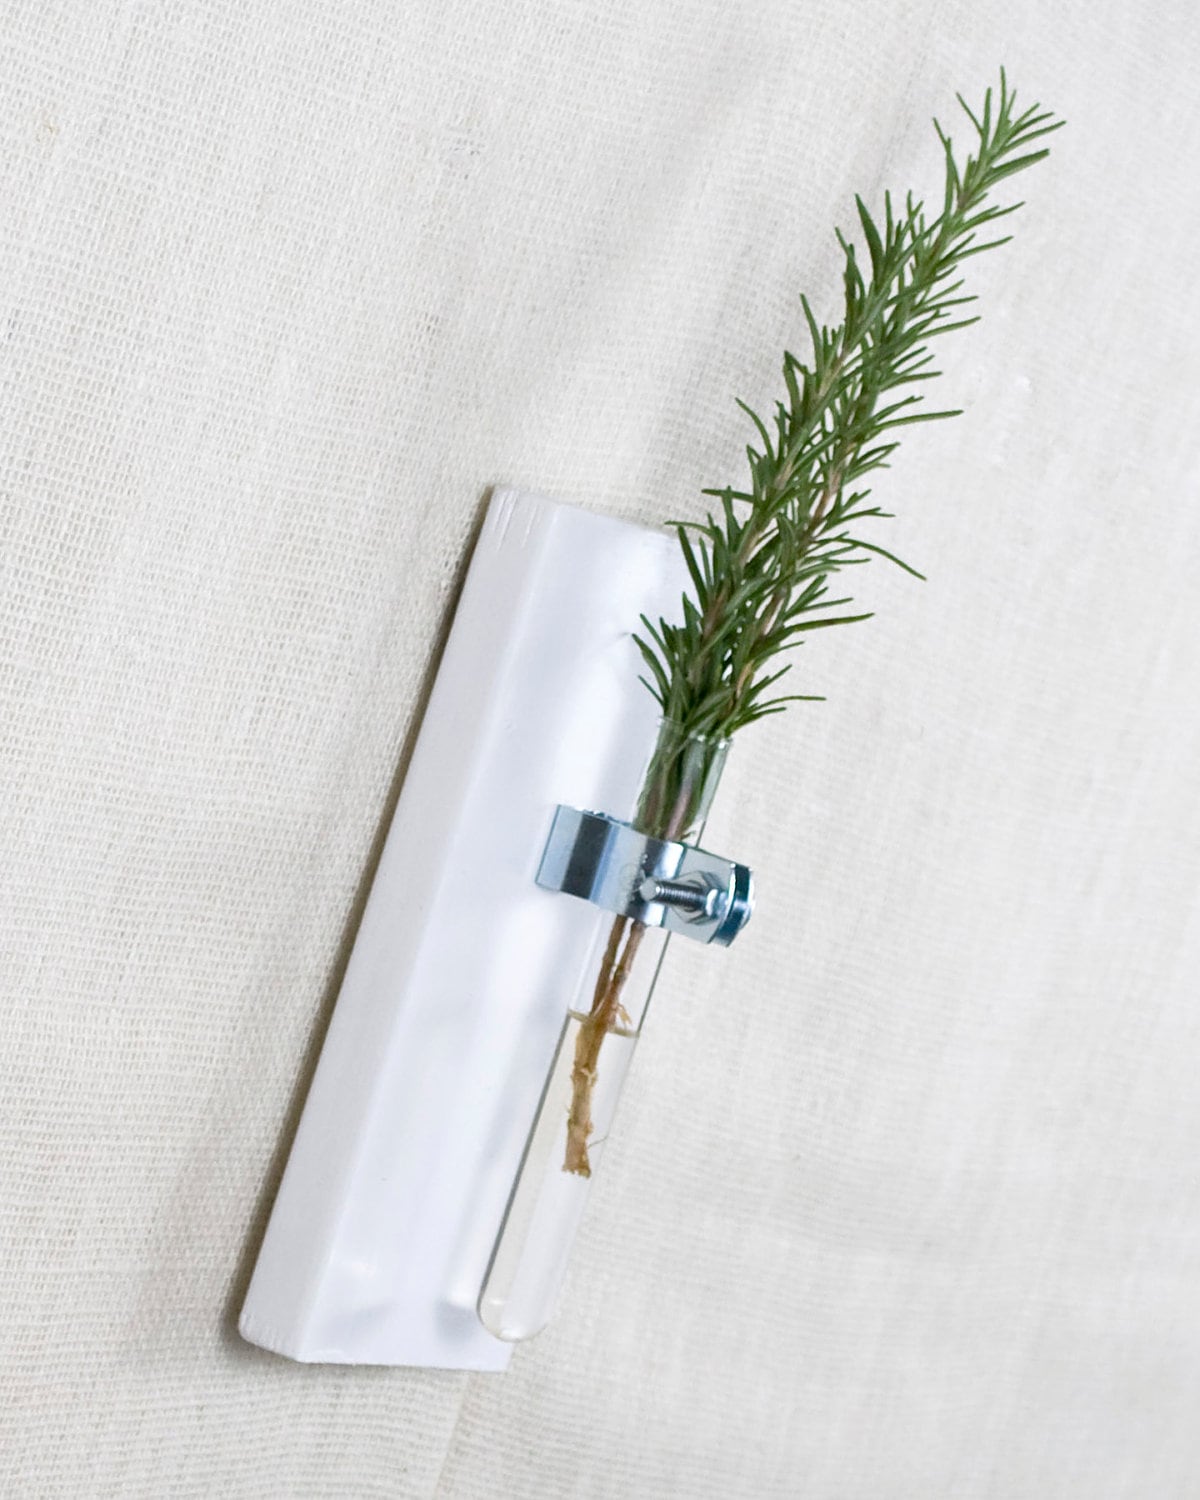 Test Tube Wall Vase Gift Set White Hanging Vase Bud by AnotherCup